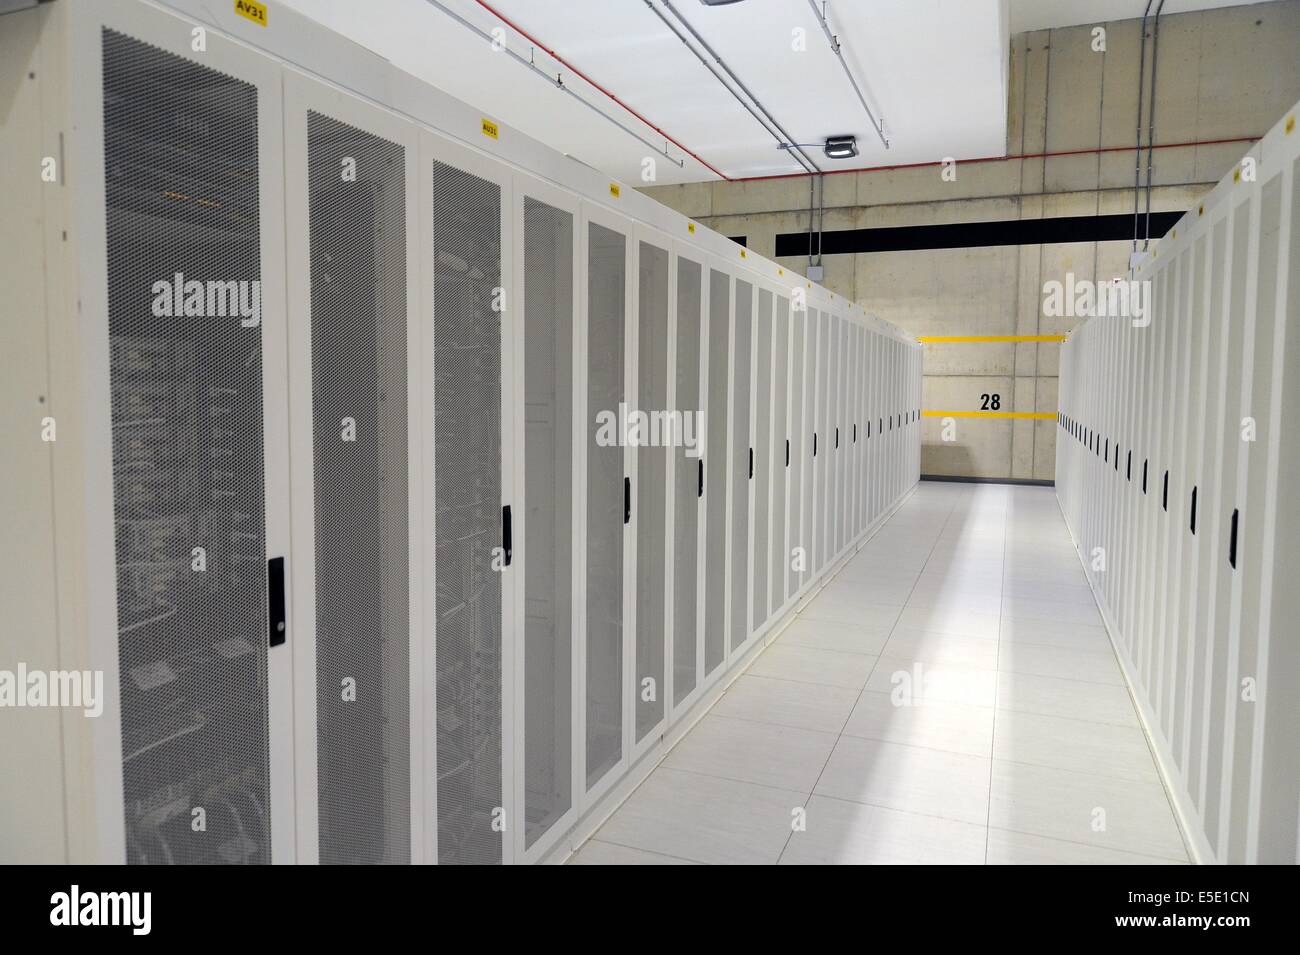 Ferrera Erbognone (Pavia, Italy), the Green Data Center, facility for the collection and management of all ENI computer data Stock Photo